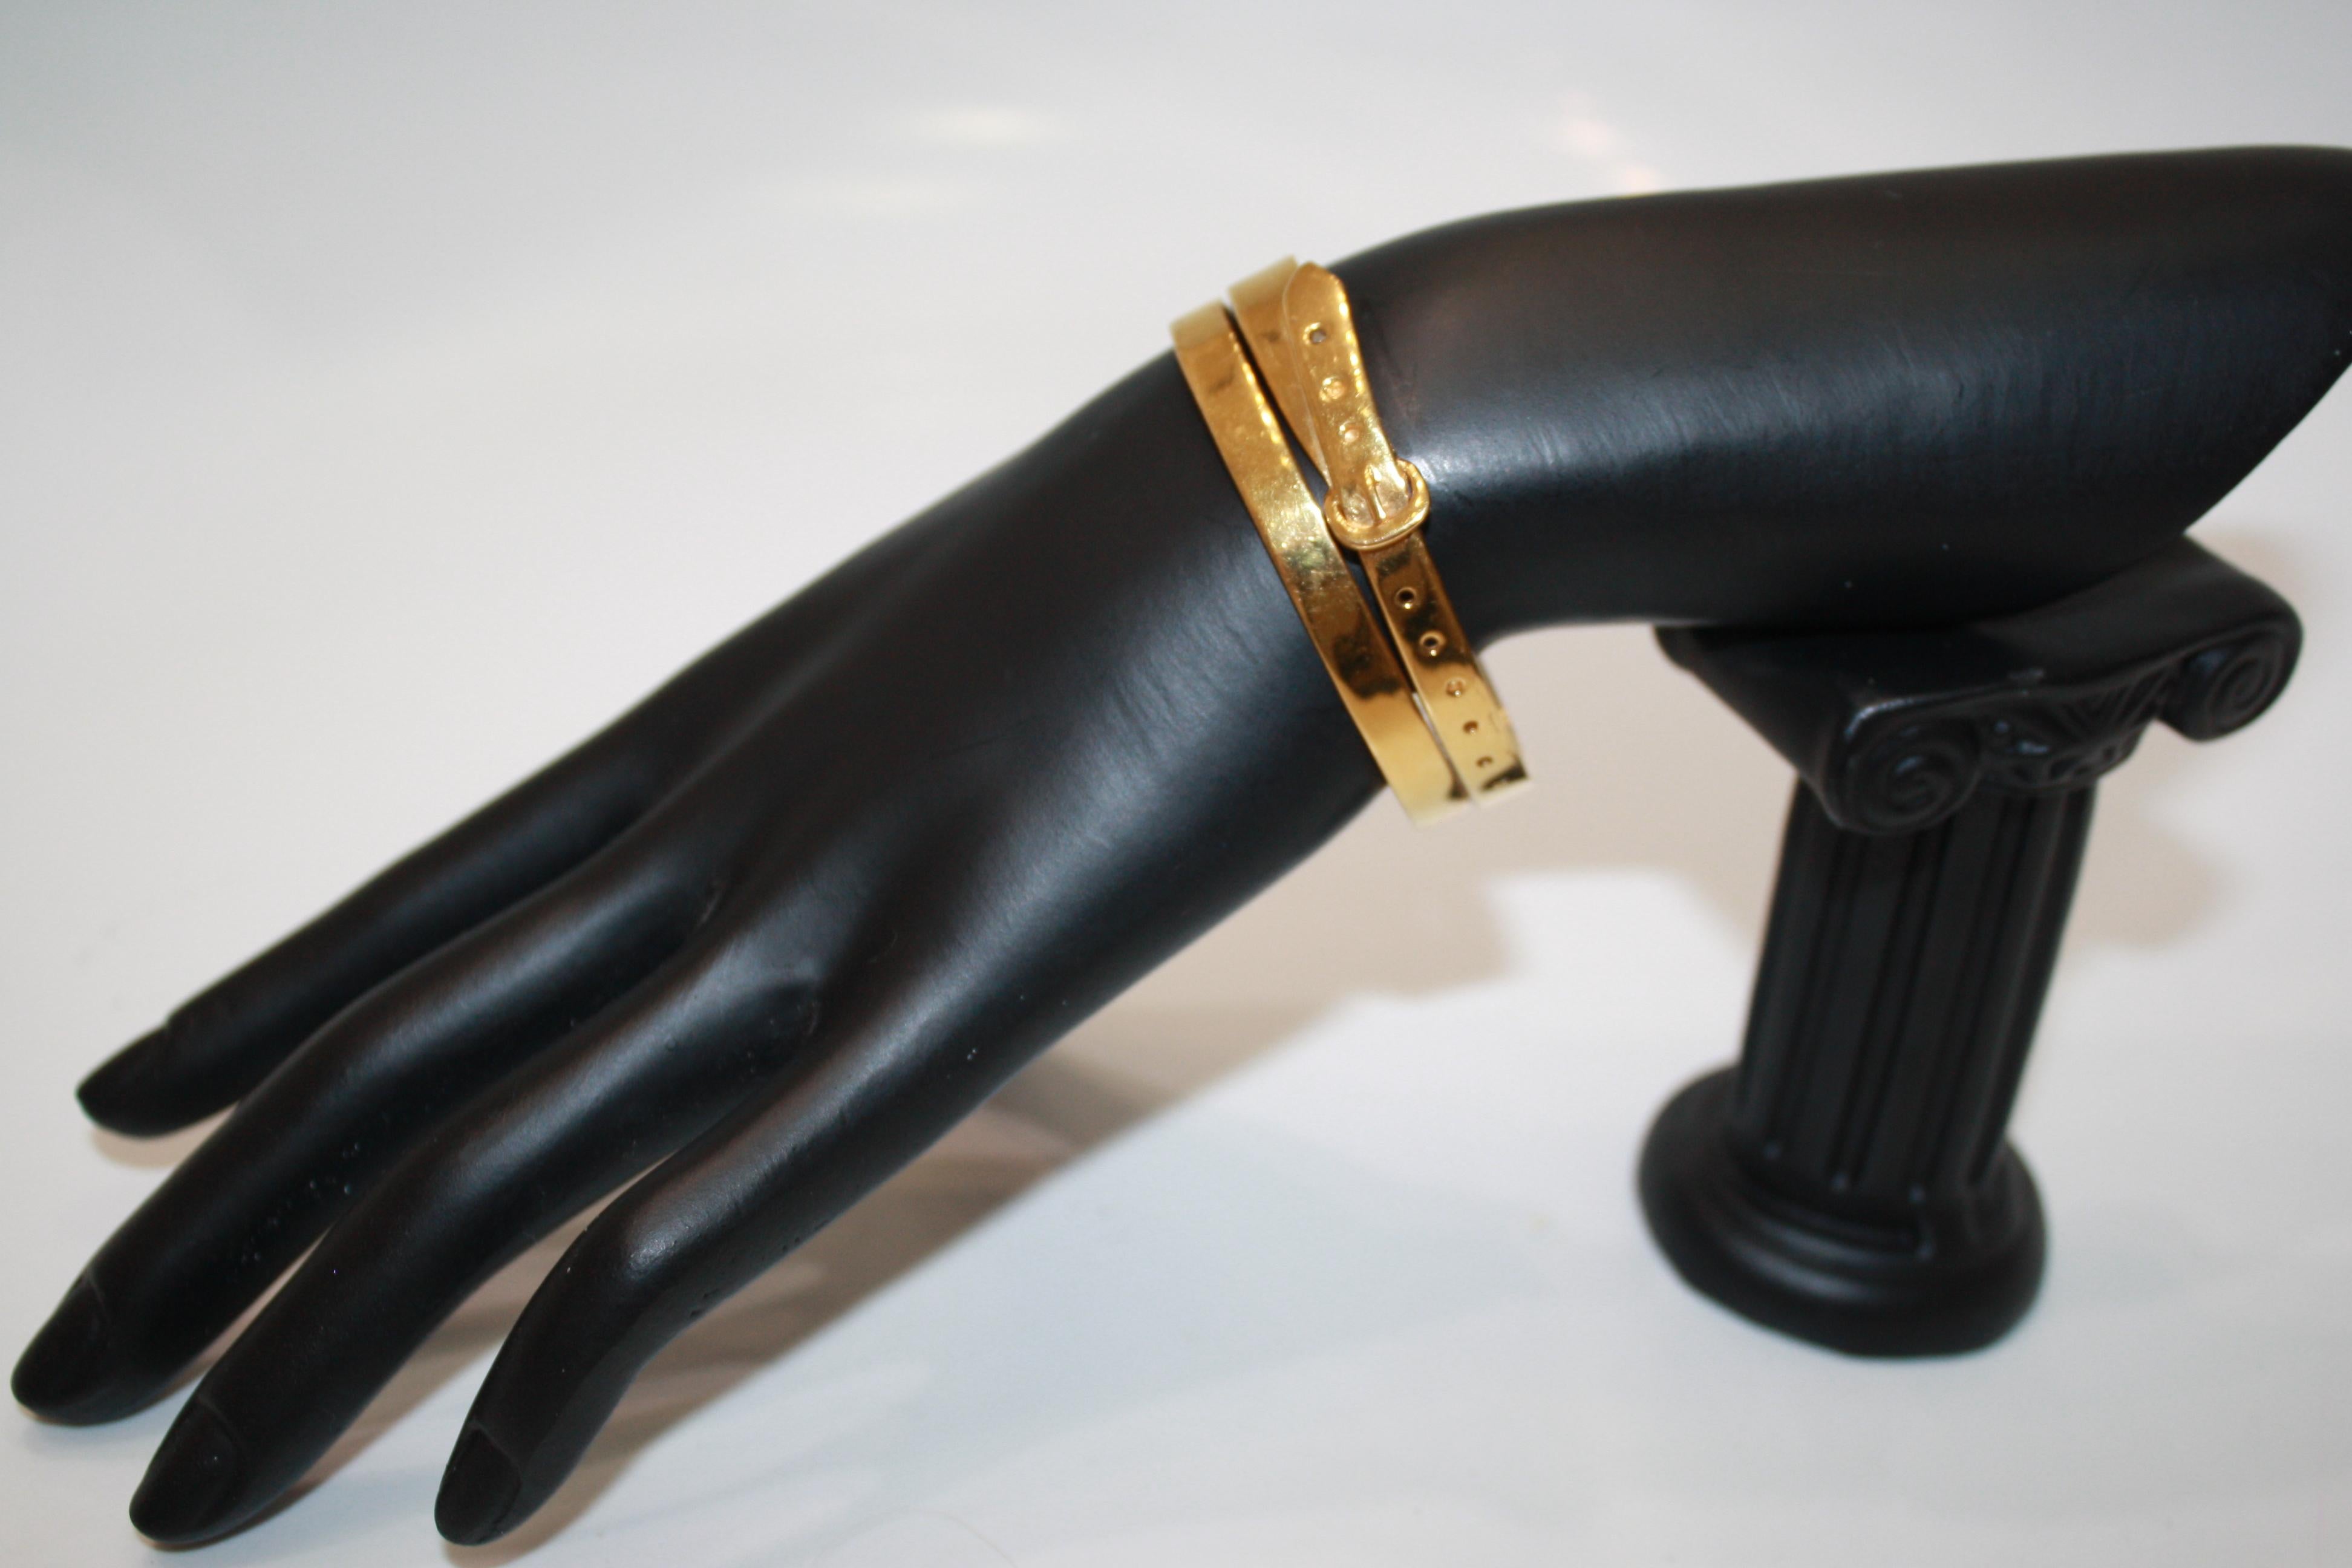 This double buckle cuff bracelet is hand made in a Parisian studio where it is dipped in an 18 carat gold bath. Cuff is malleable and can be adjusted to fit most wrist sizes. 